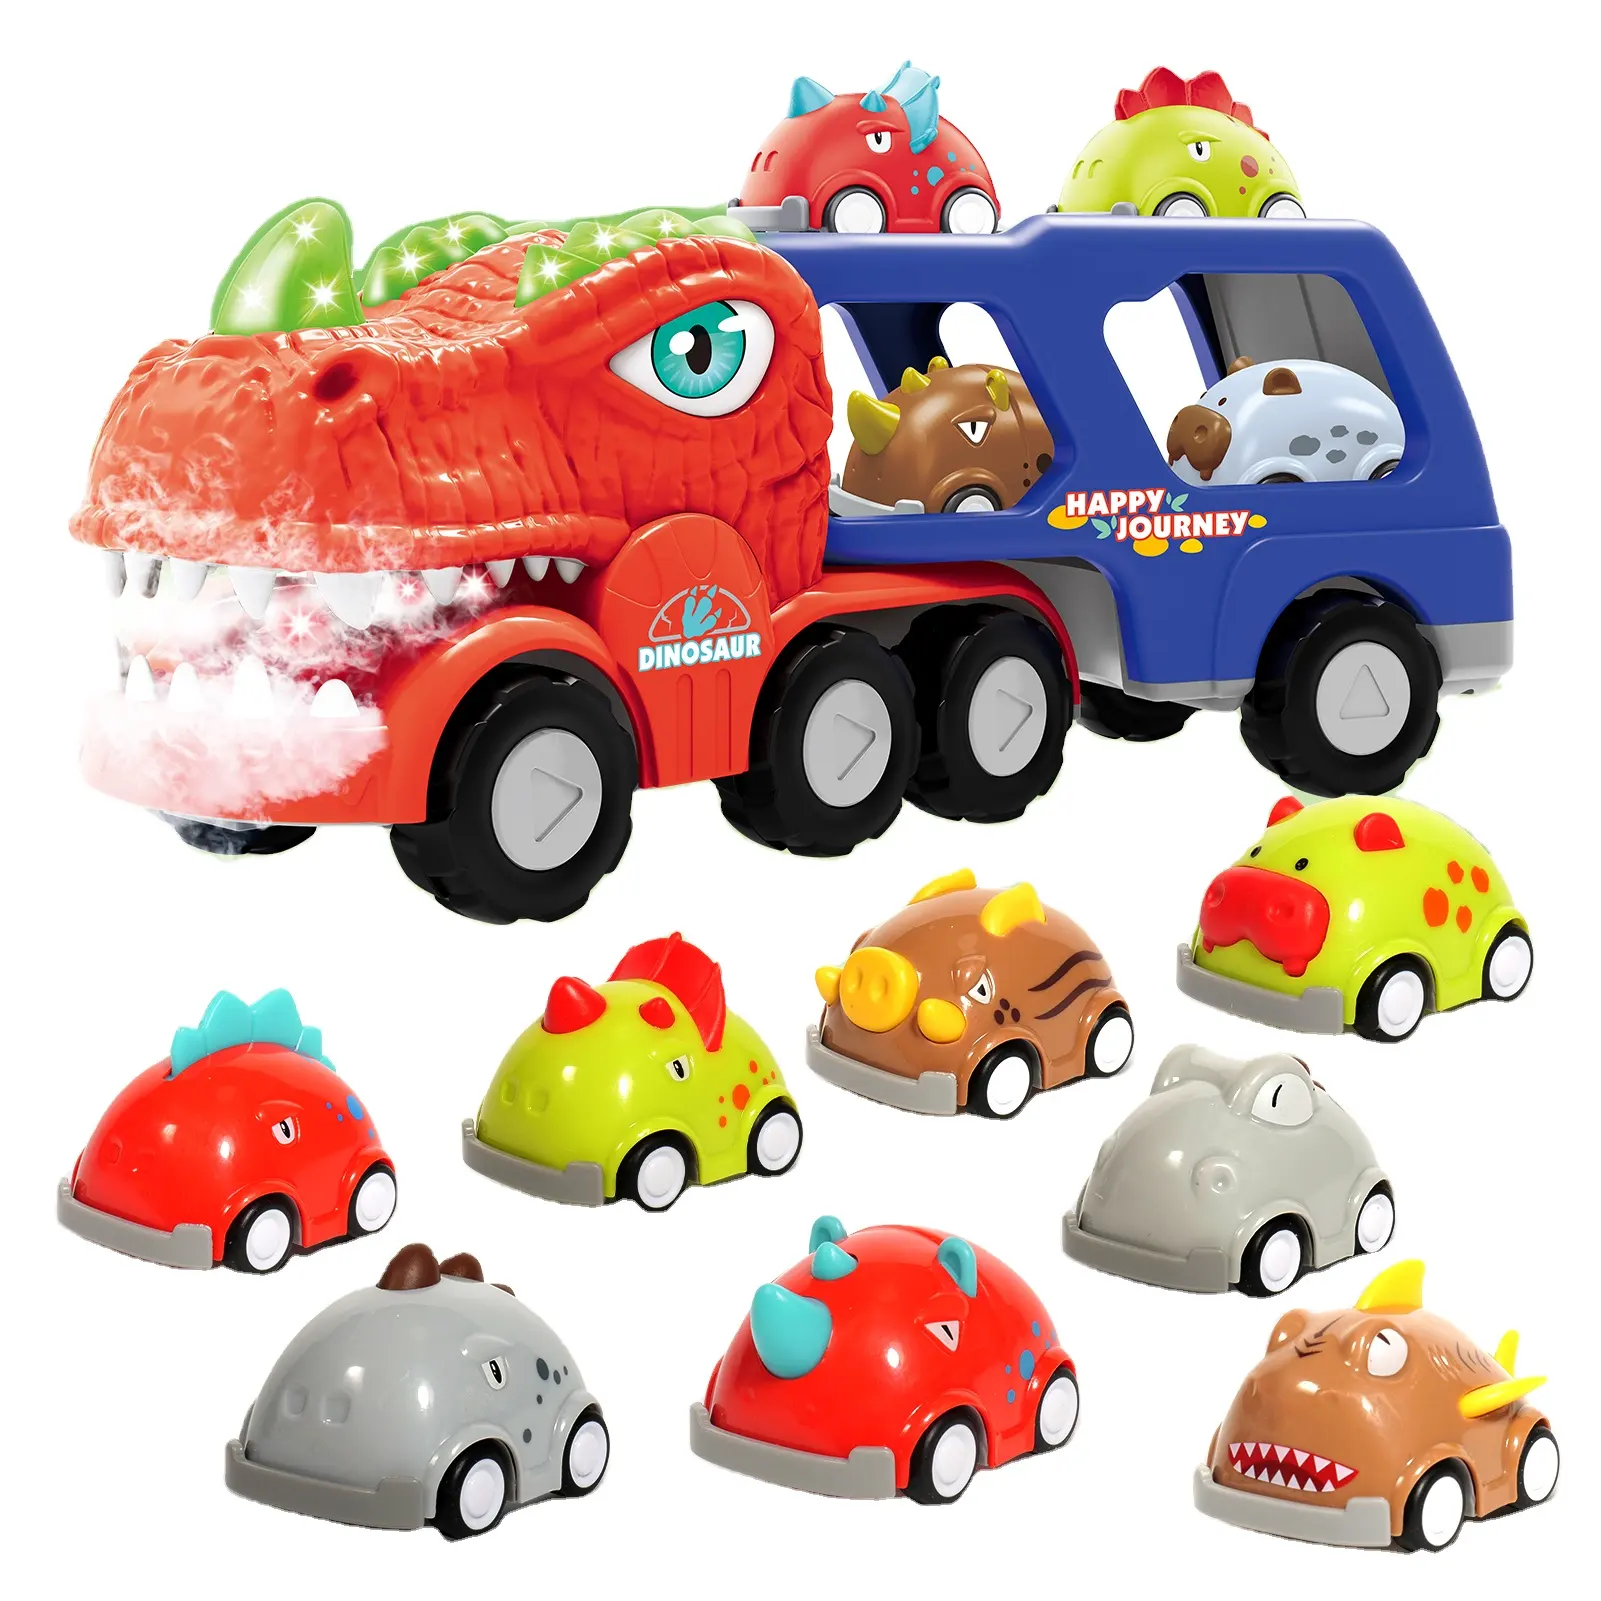 CPC Dinosaur Toy Pull Back Car toys, 6 Pack Dino Toys, Dinosaur Games with T-Rex kids toys vehicle car toy car with ramp